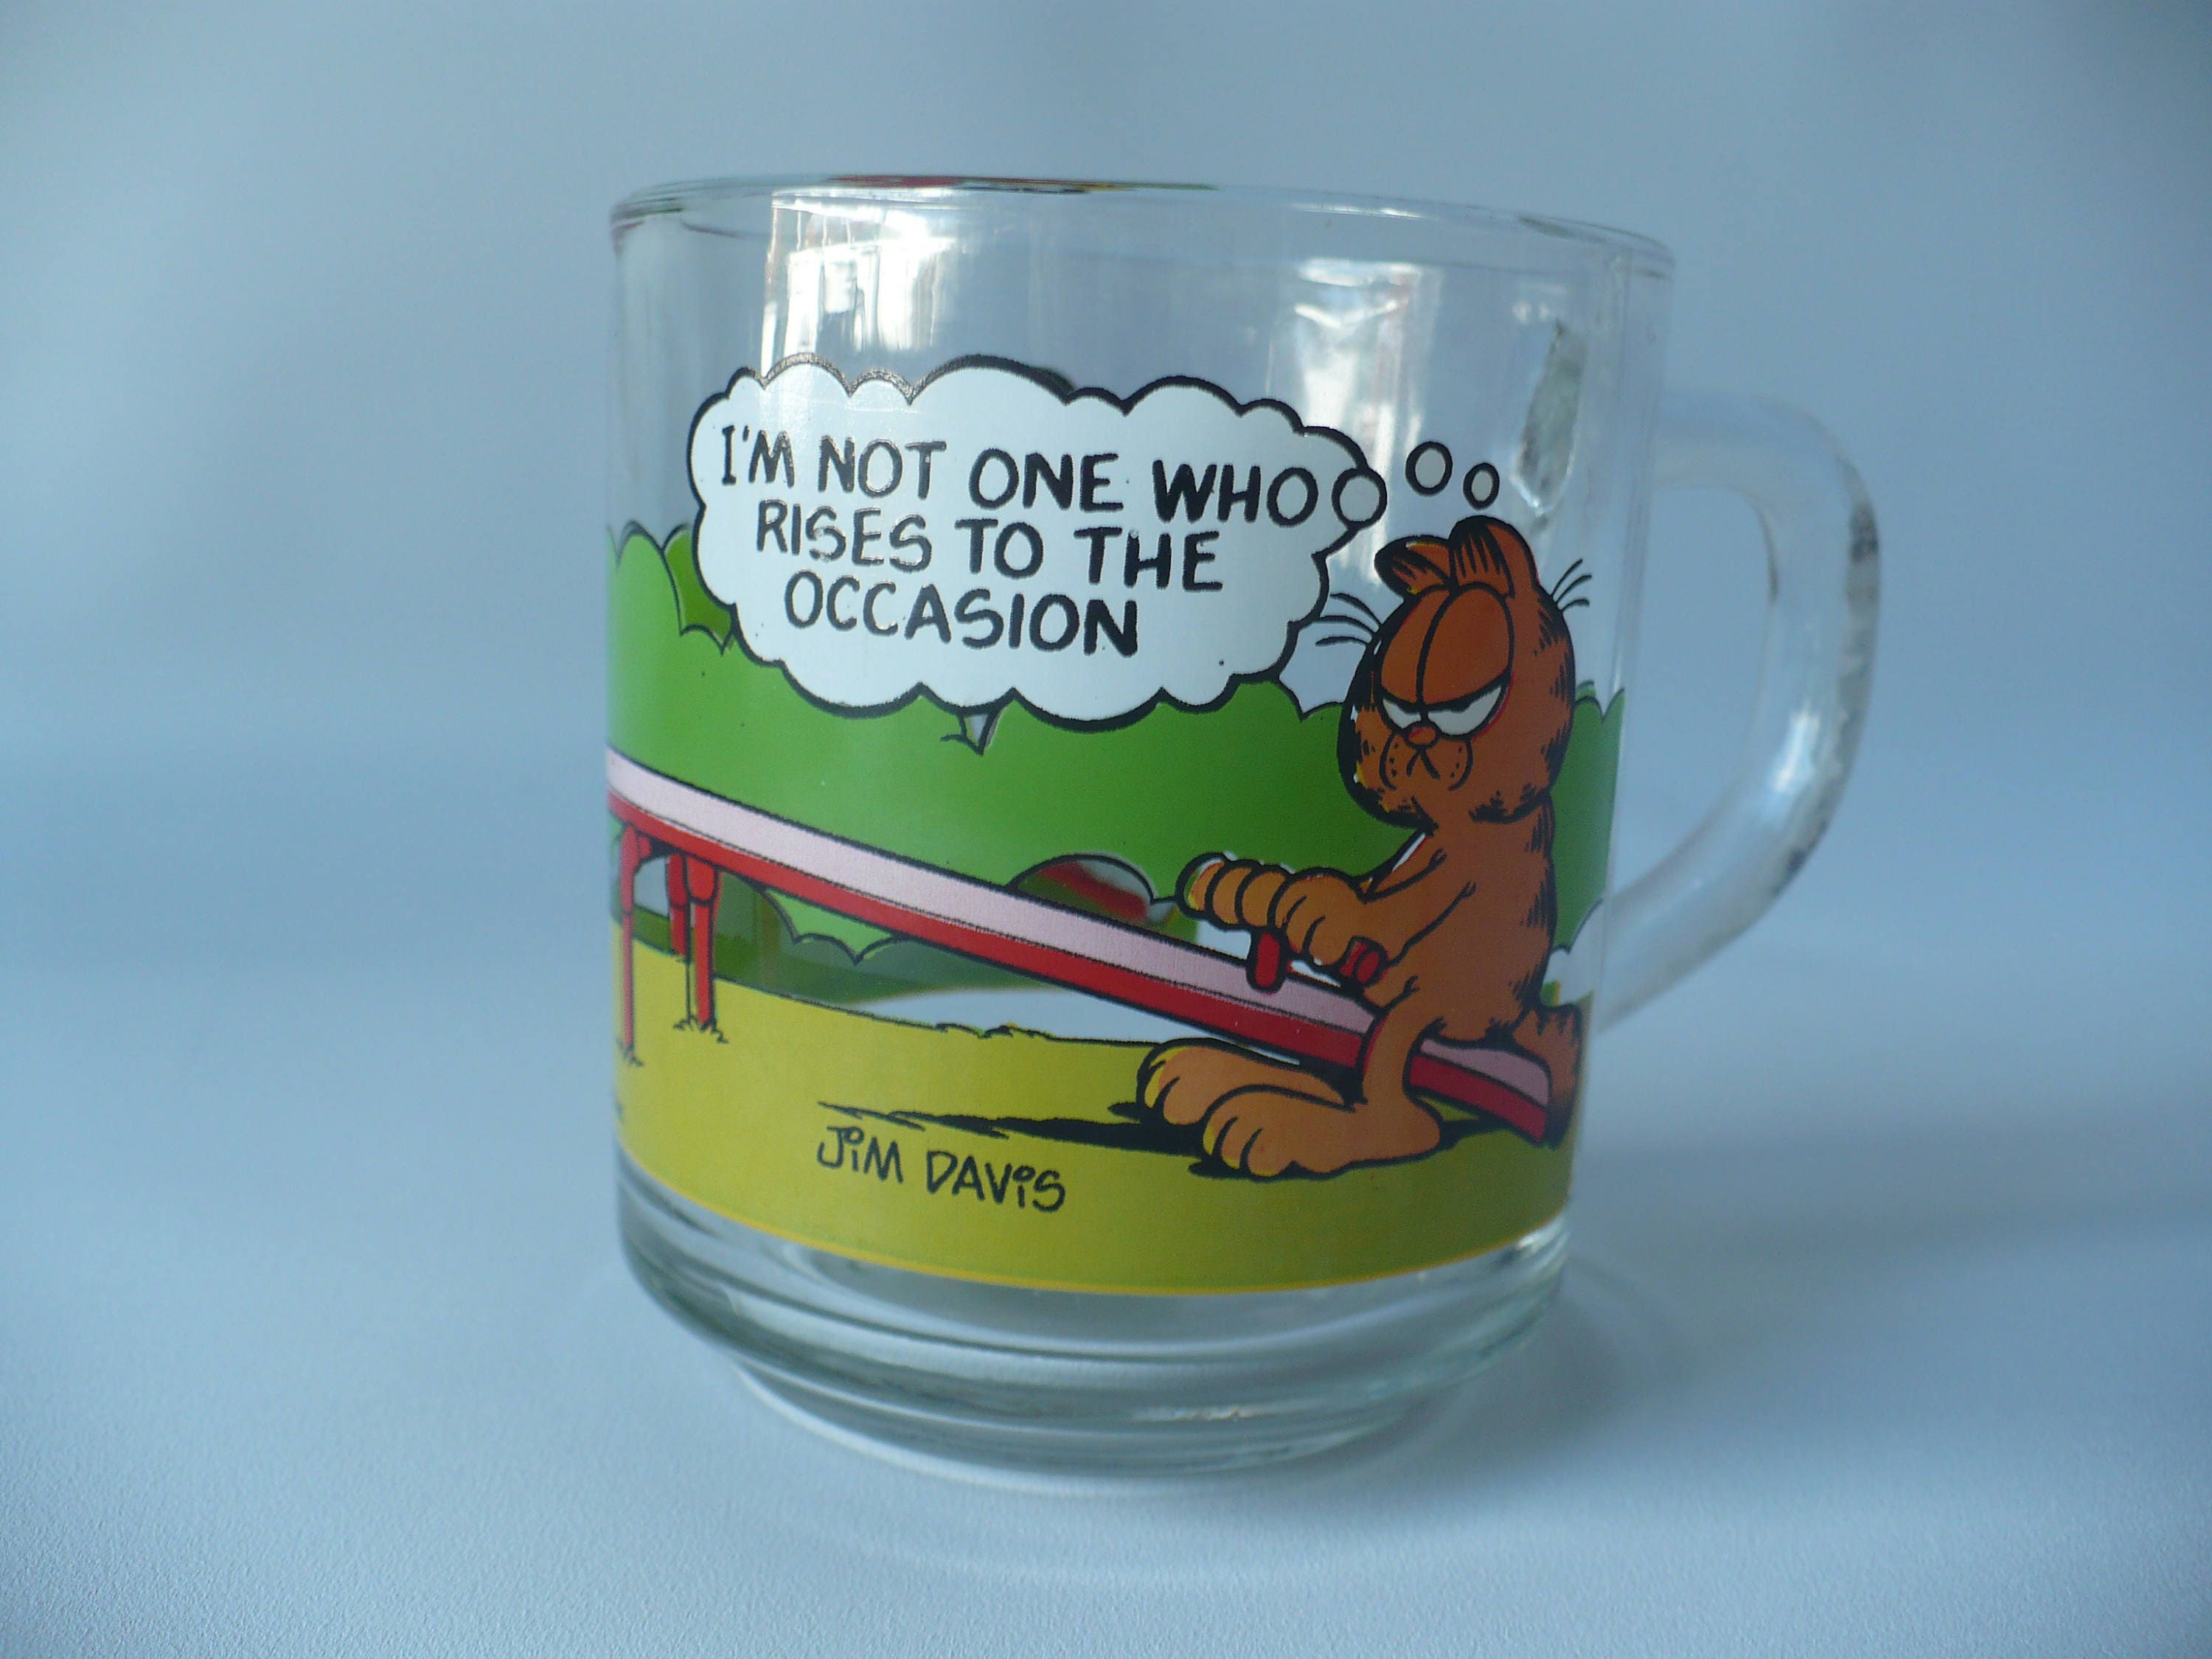 Details about  / Vintage 1978 GARFIELD McDonalds Promotional Glass Coffee Mug Cup